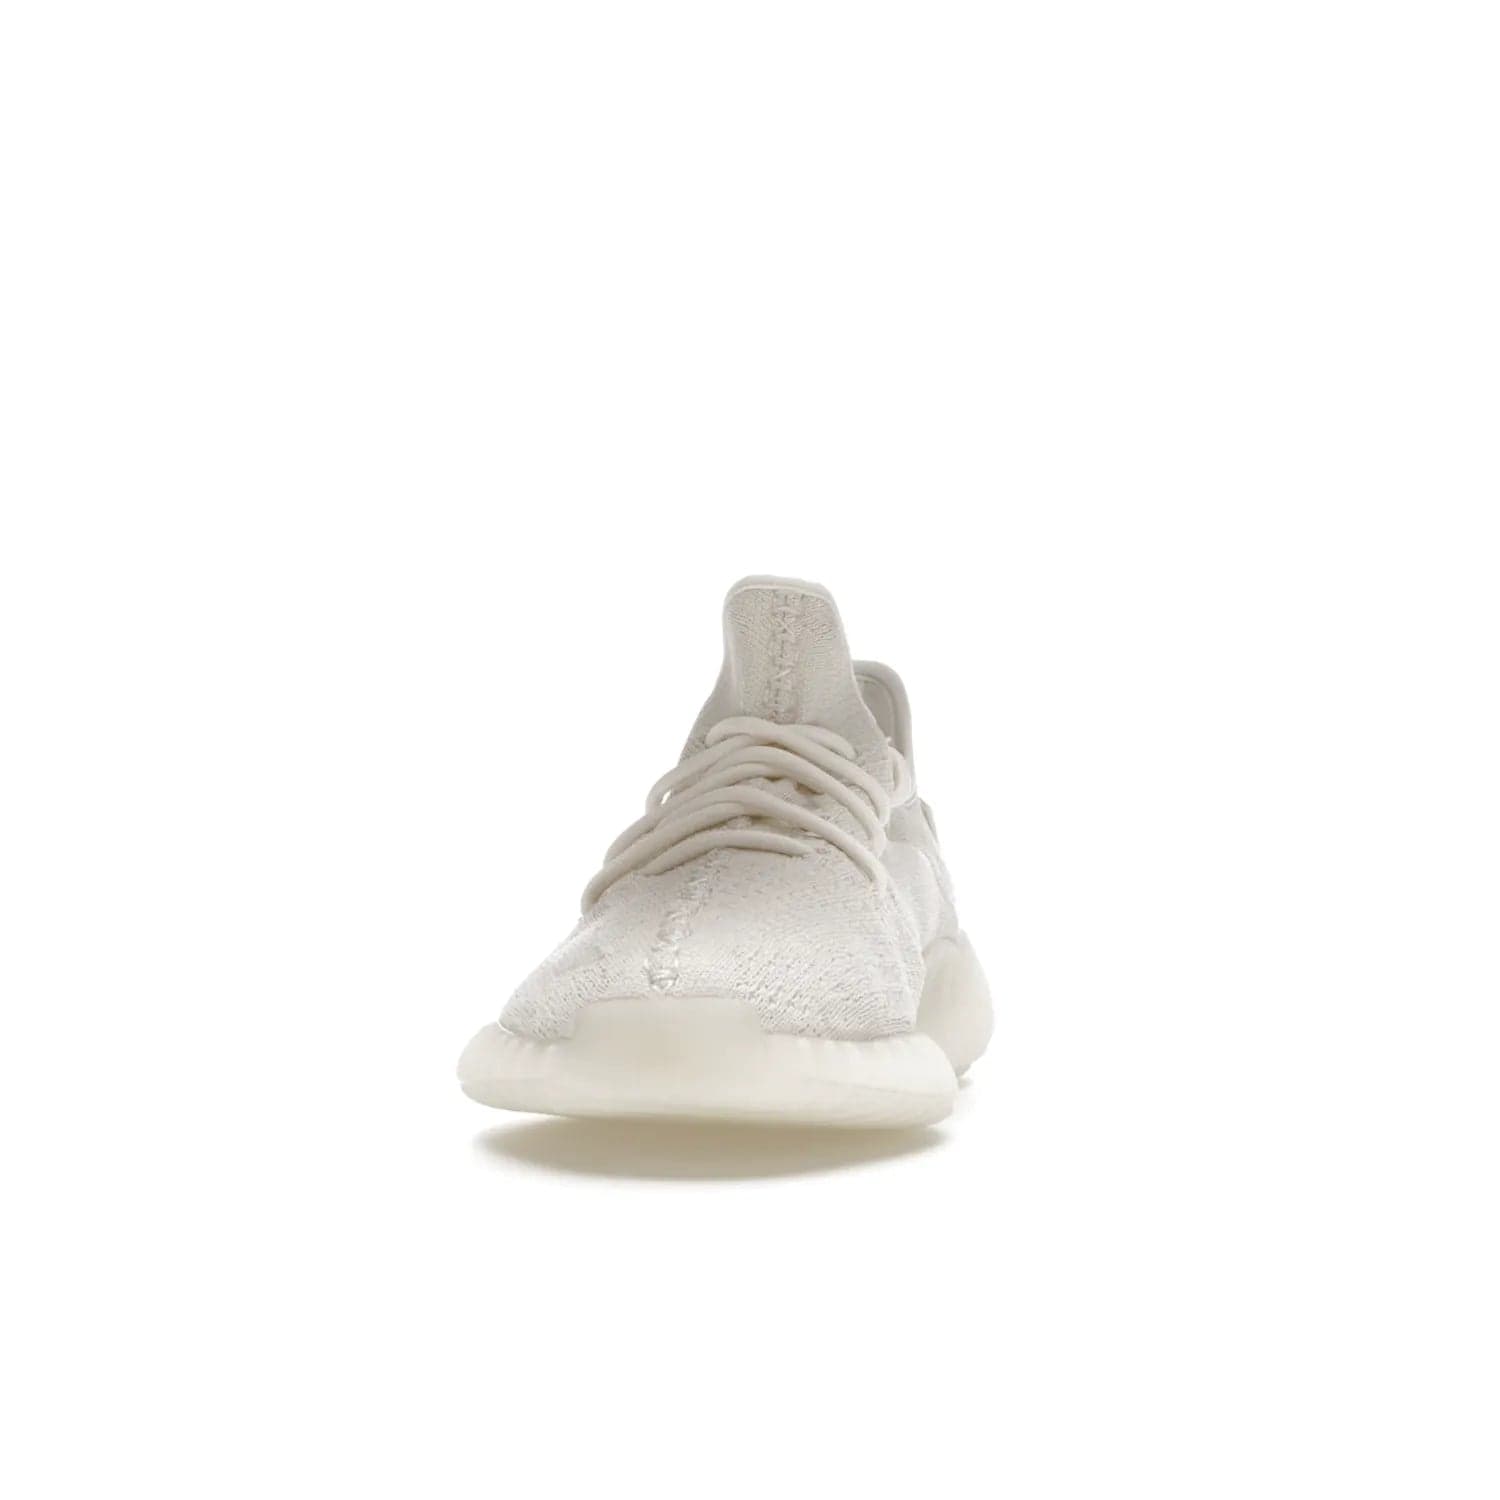 adidas Yeezy Boost 350 V2 Bone - Image 11 - Only at www.BallersClubKickz.com - Grab the stylish and comfortable adidas Yeezy Boost 350 V2 Bone in March 2022. This sneaker features a triple white Primeknit upper, mesh side stripes and canvas heel tabs, sitting atop a semi-translucent sole with Boost technology. Sure to keep your feet comfortable and stylish!